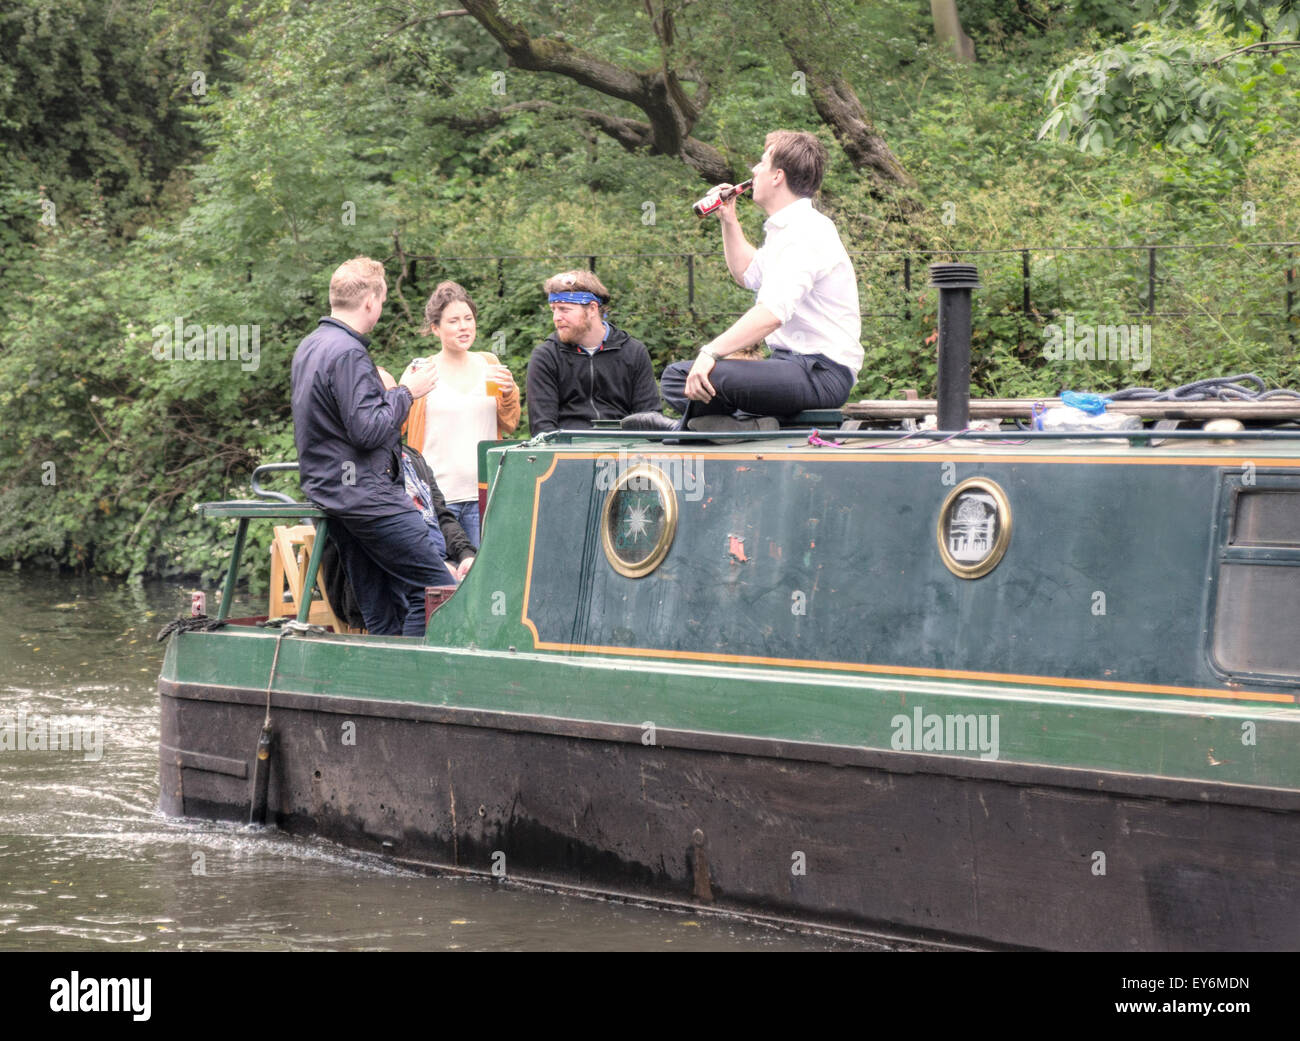 canal boat,  young people on barge,  barge trip Stock Photo